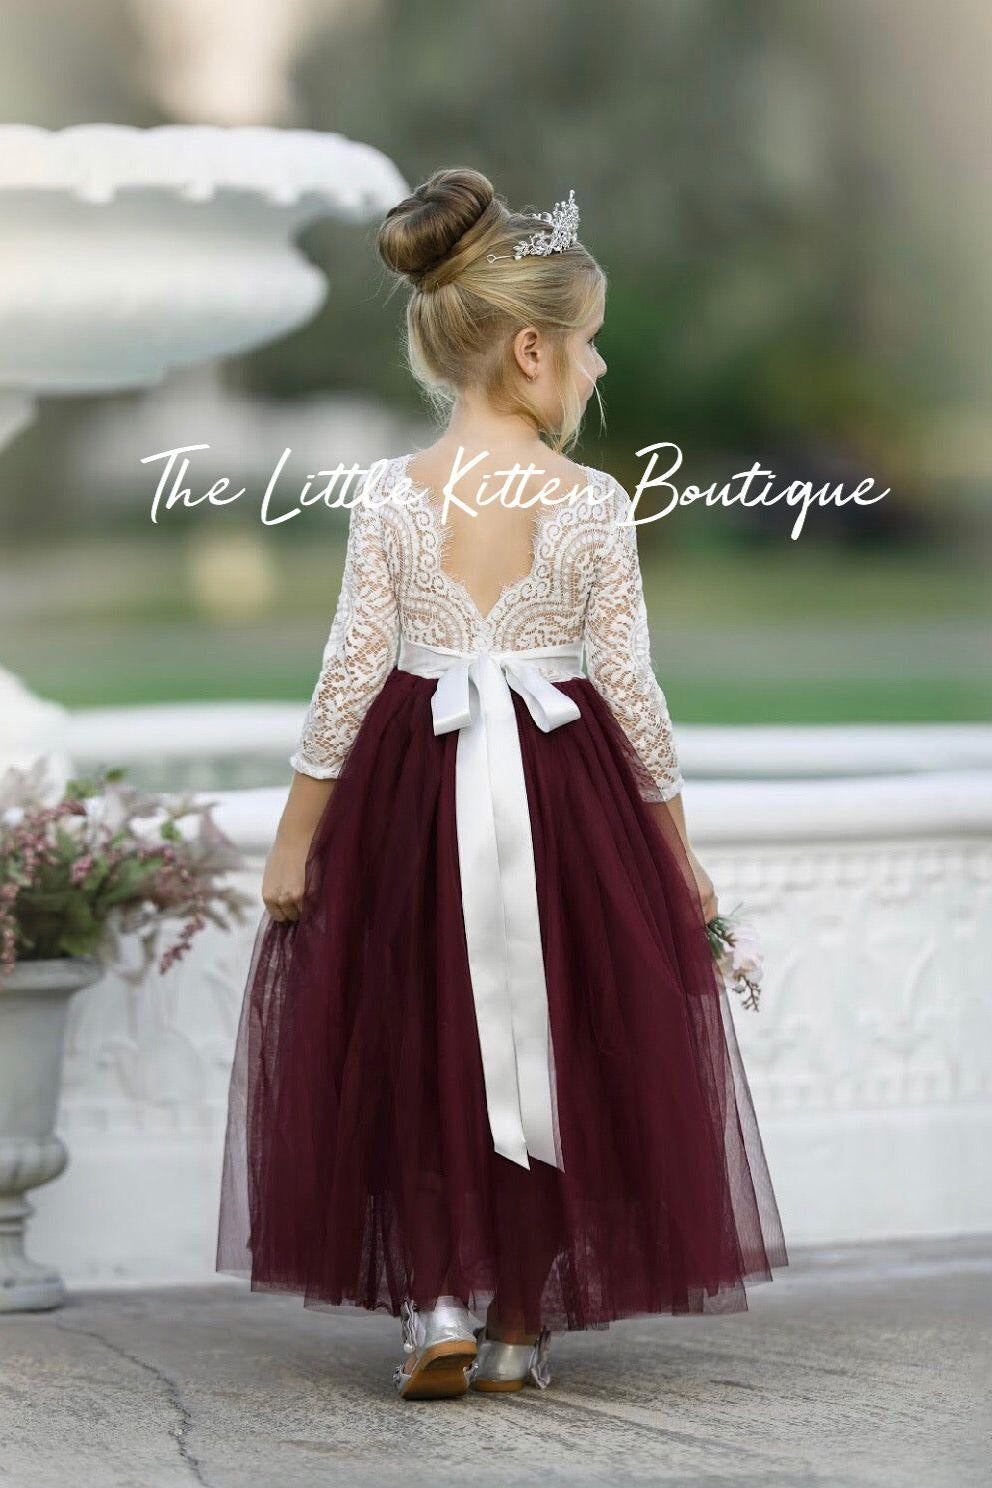 Long Sleeve Tulle and Lace Flower Girl Dress - The Little Kitten Boutique